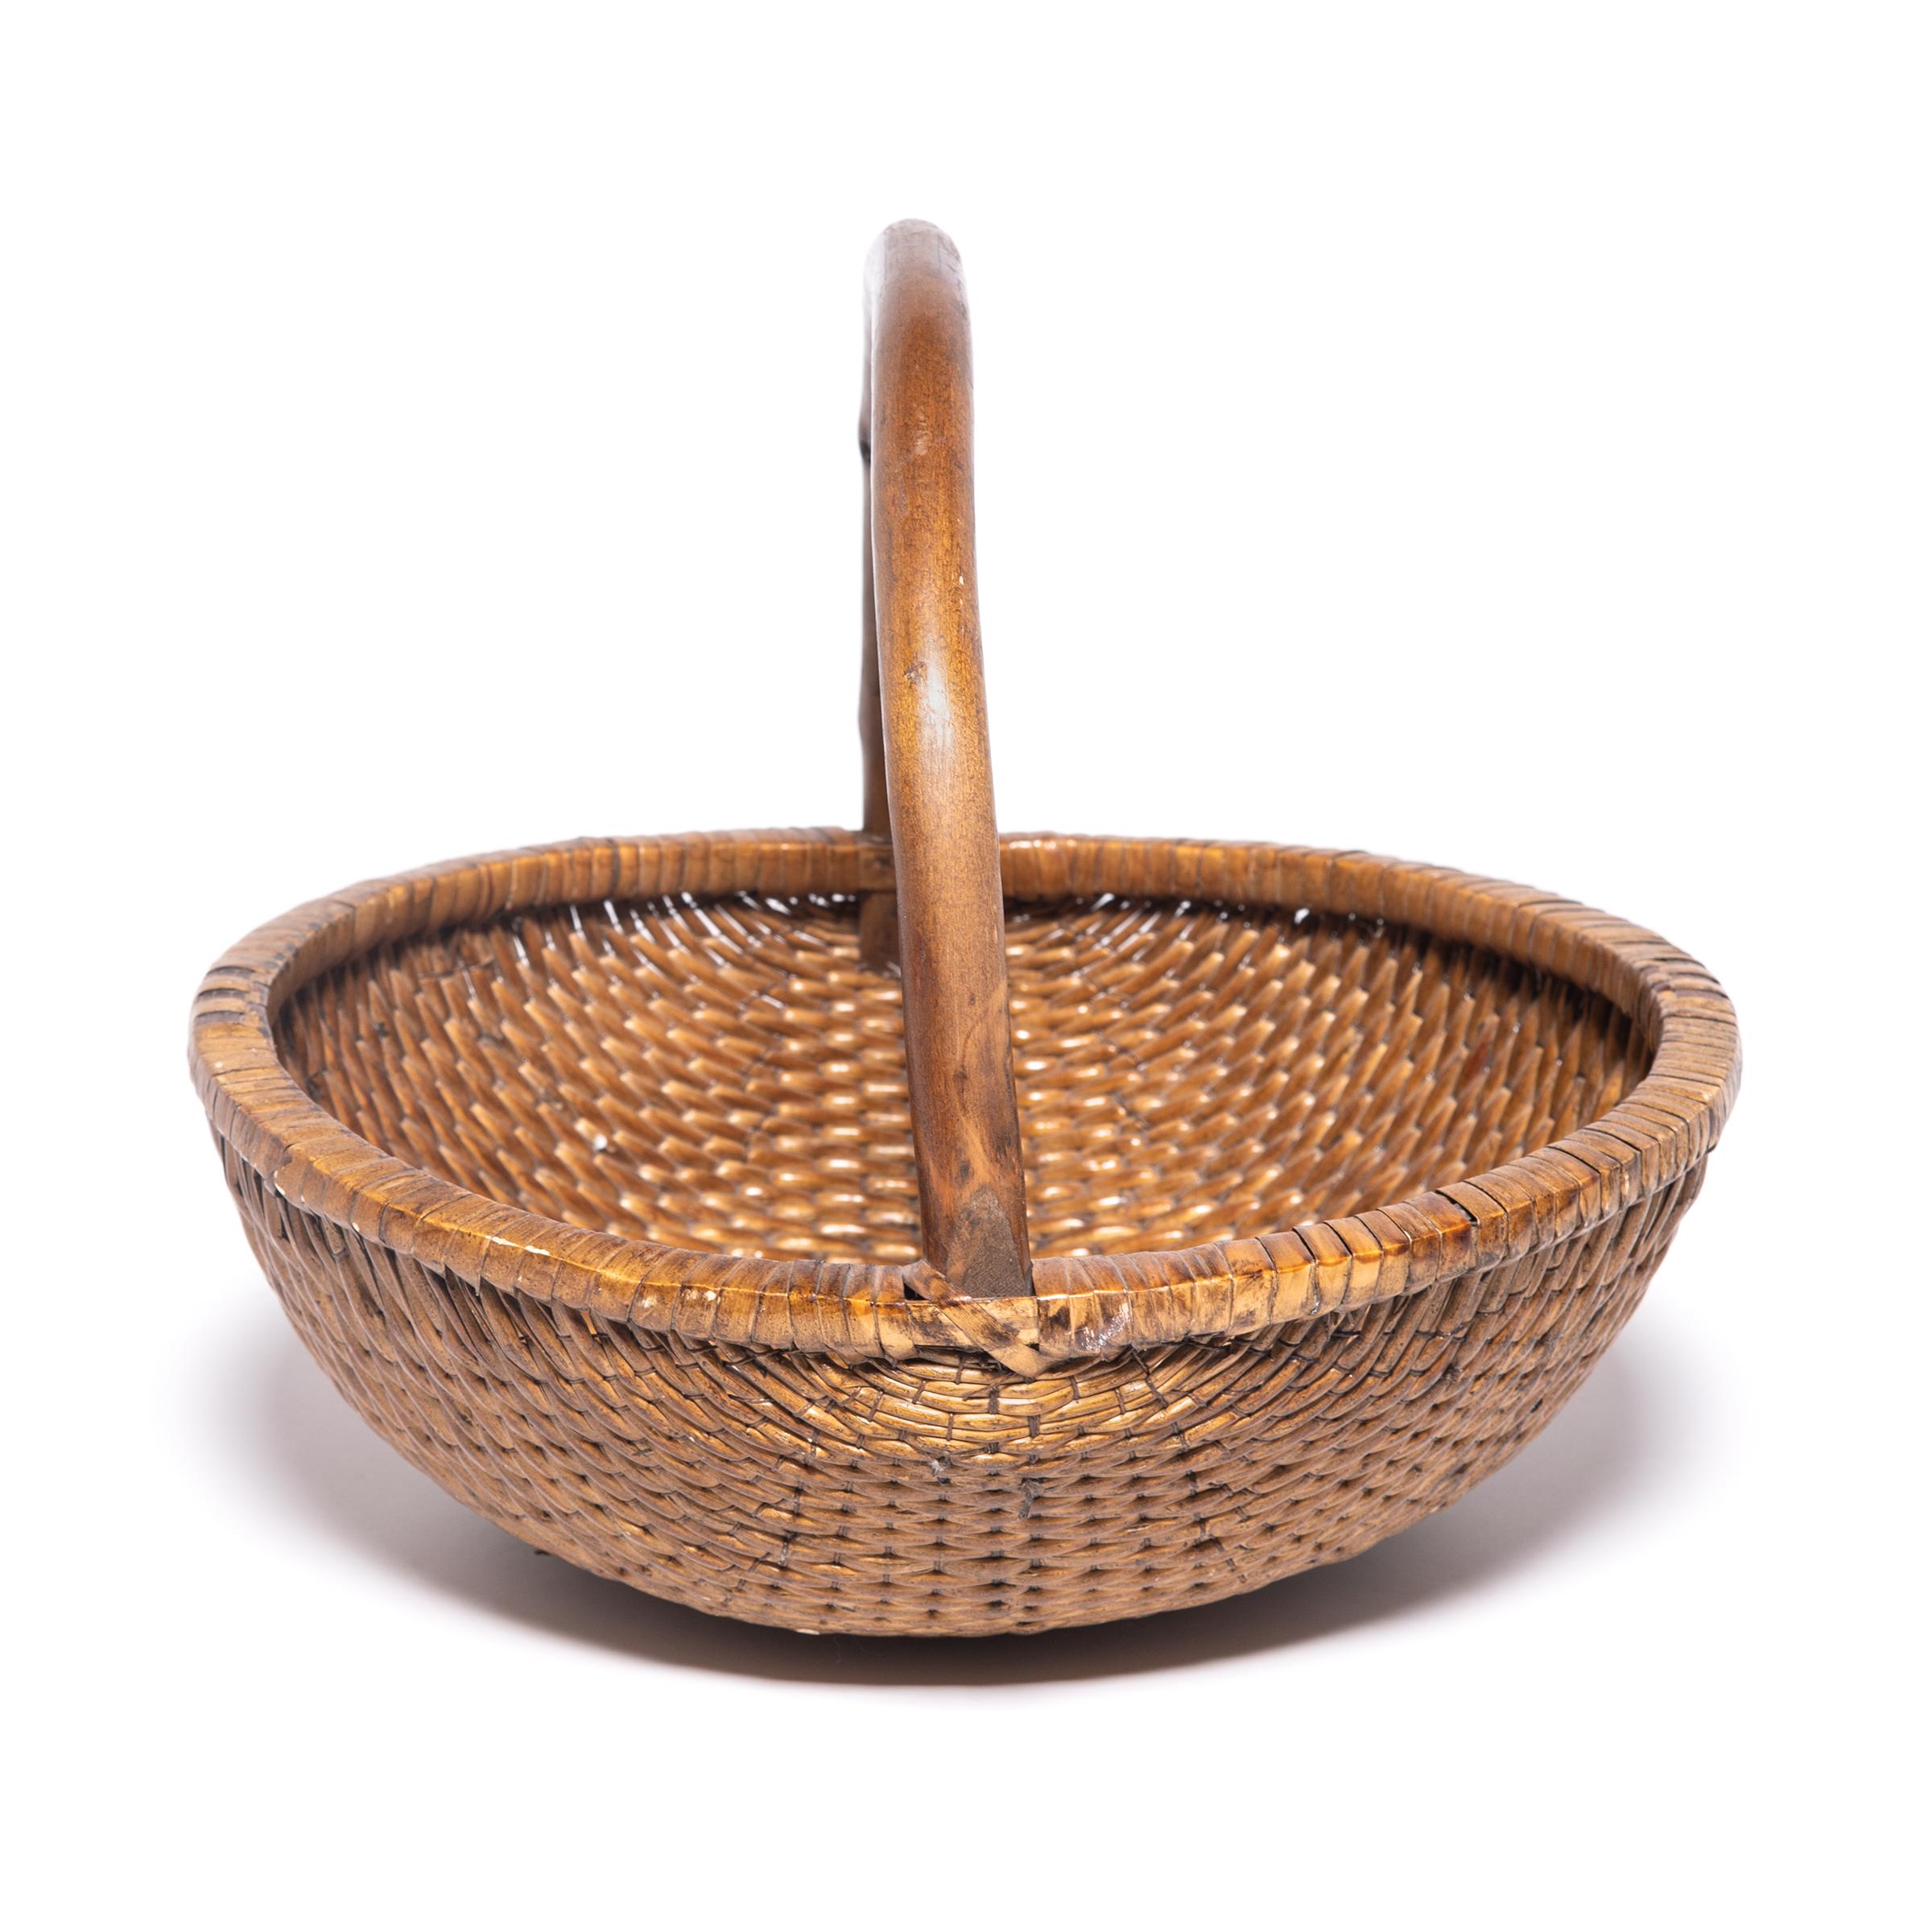 This basket was made in Southern China over a century ago by a skilled artisan with many years of training. It was common to learn the skill from a father or older family member: the knowledge passing from generation to generation. This basket has a